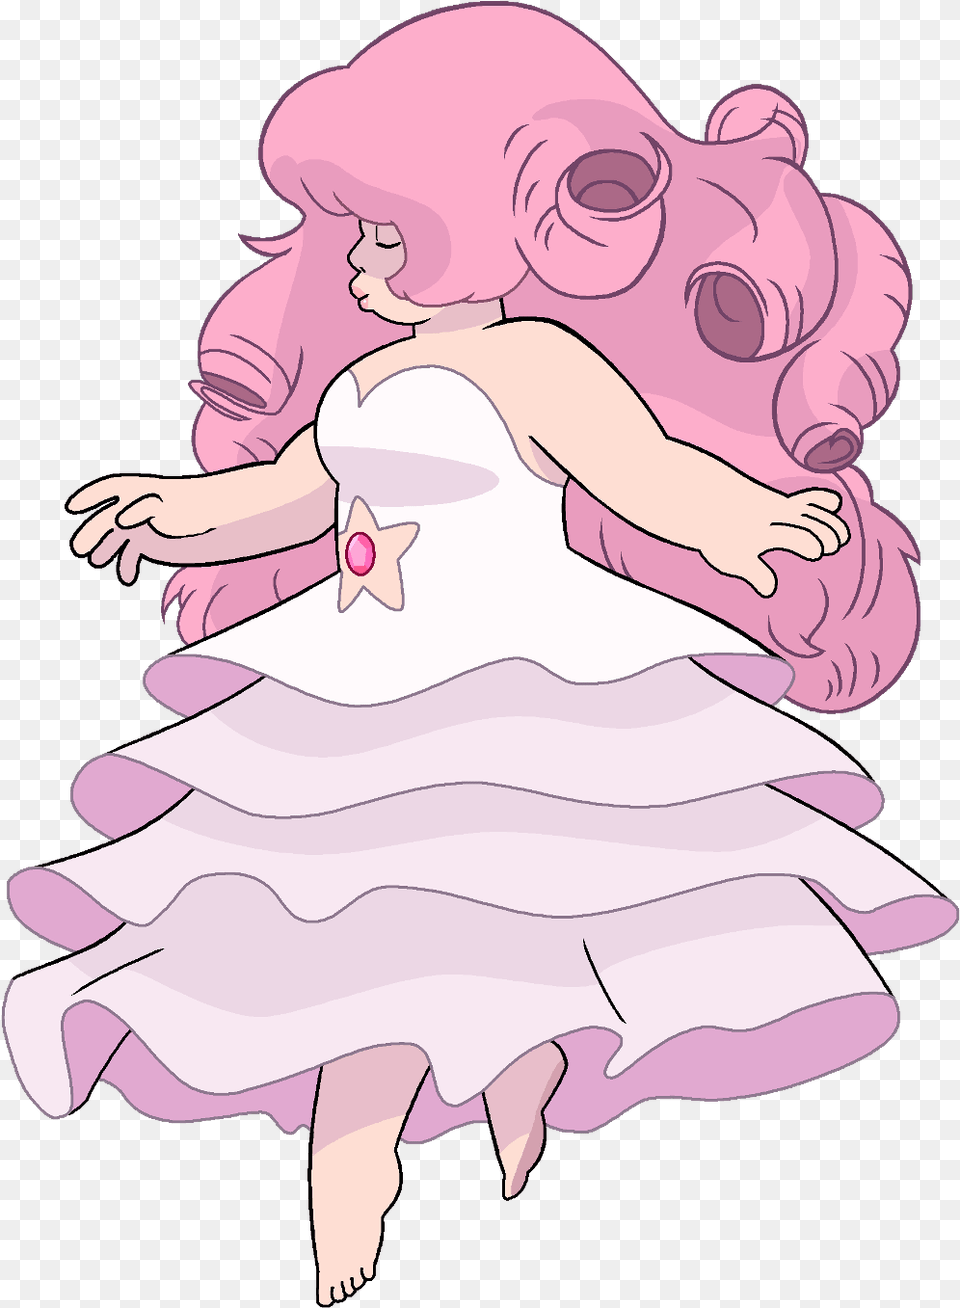 Got It From Google Images Its Not Hard To Find Steven Universe Rose Quartz Transparent, Clothing, Dress, Baby, Person Free Png Download